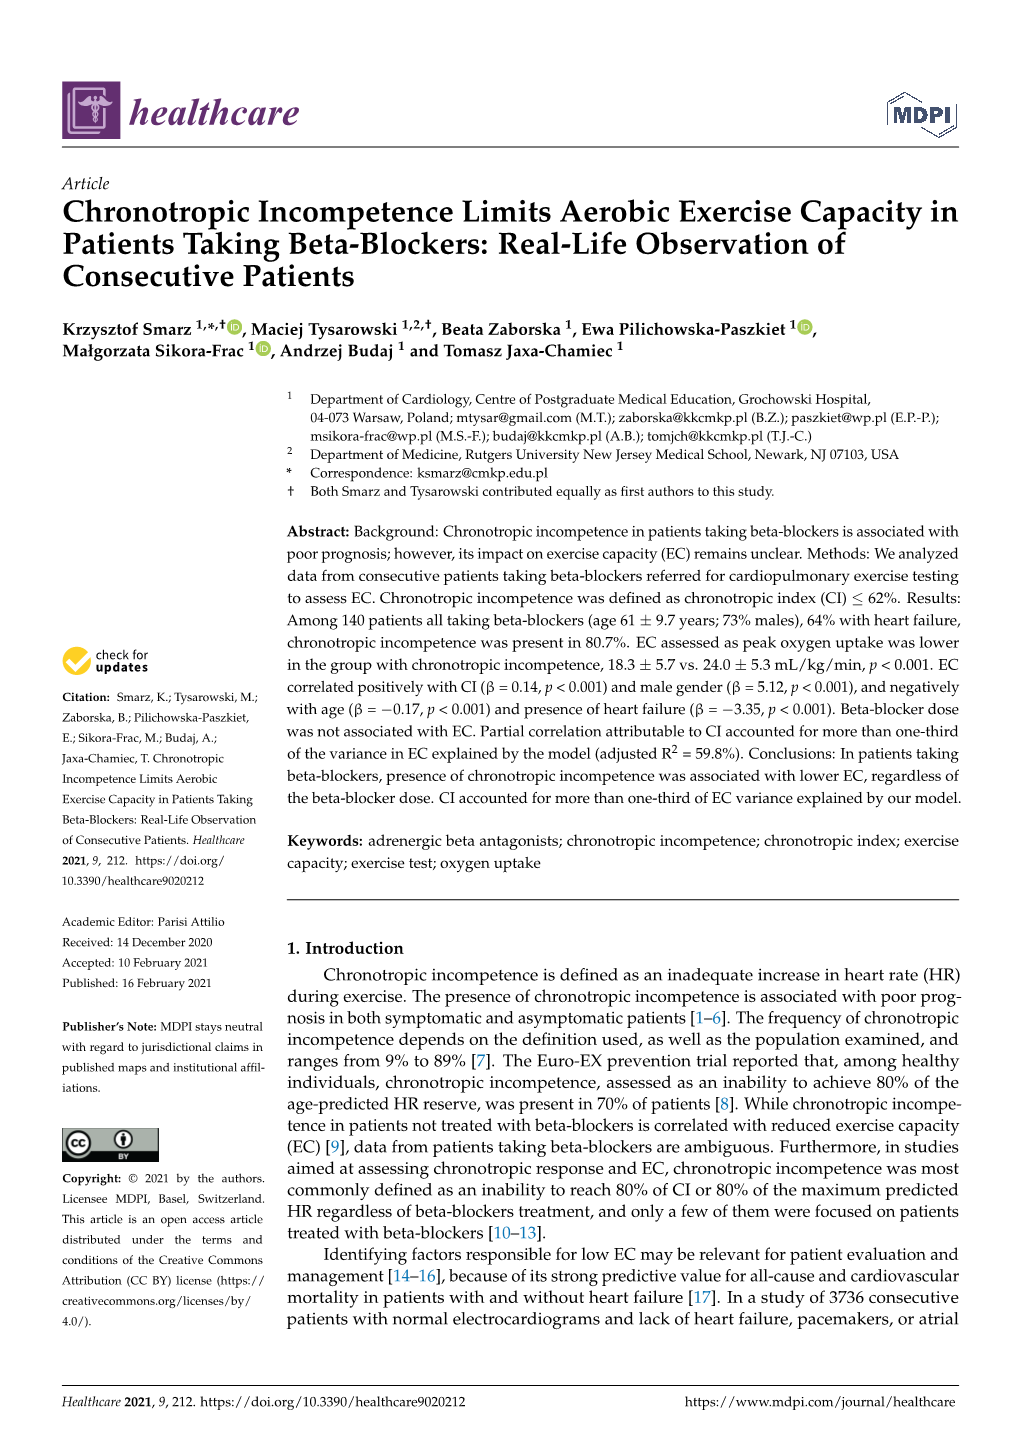 Chronotropic Incompetence Limits Aerobic Exercise Capacity in Patients Taking Beta-Blockers: Real-Life Observation of Consecutive Patients